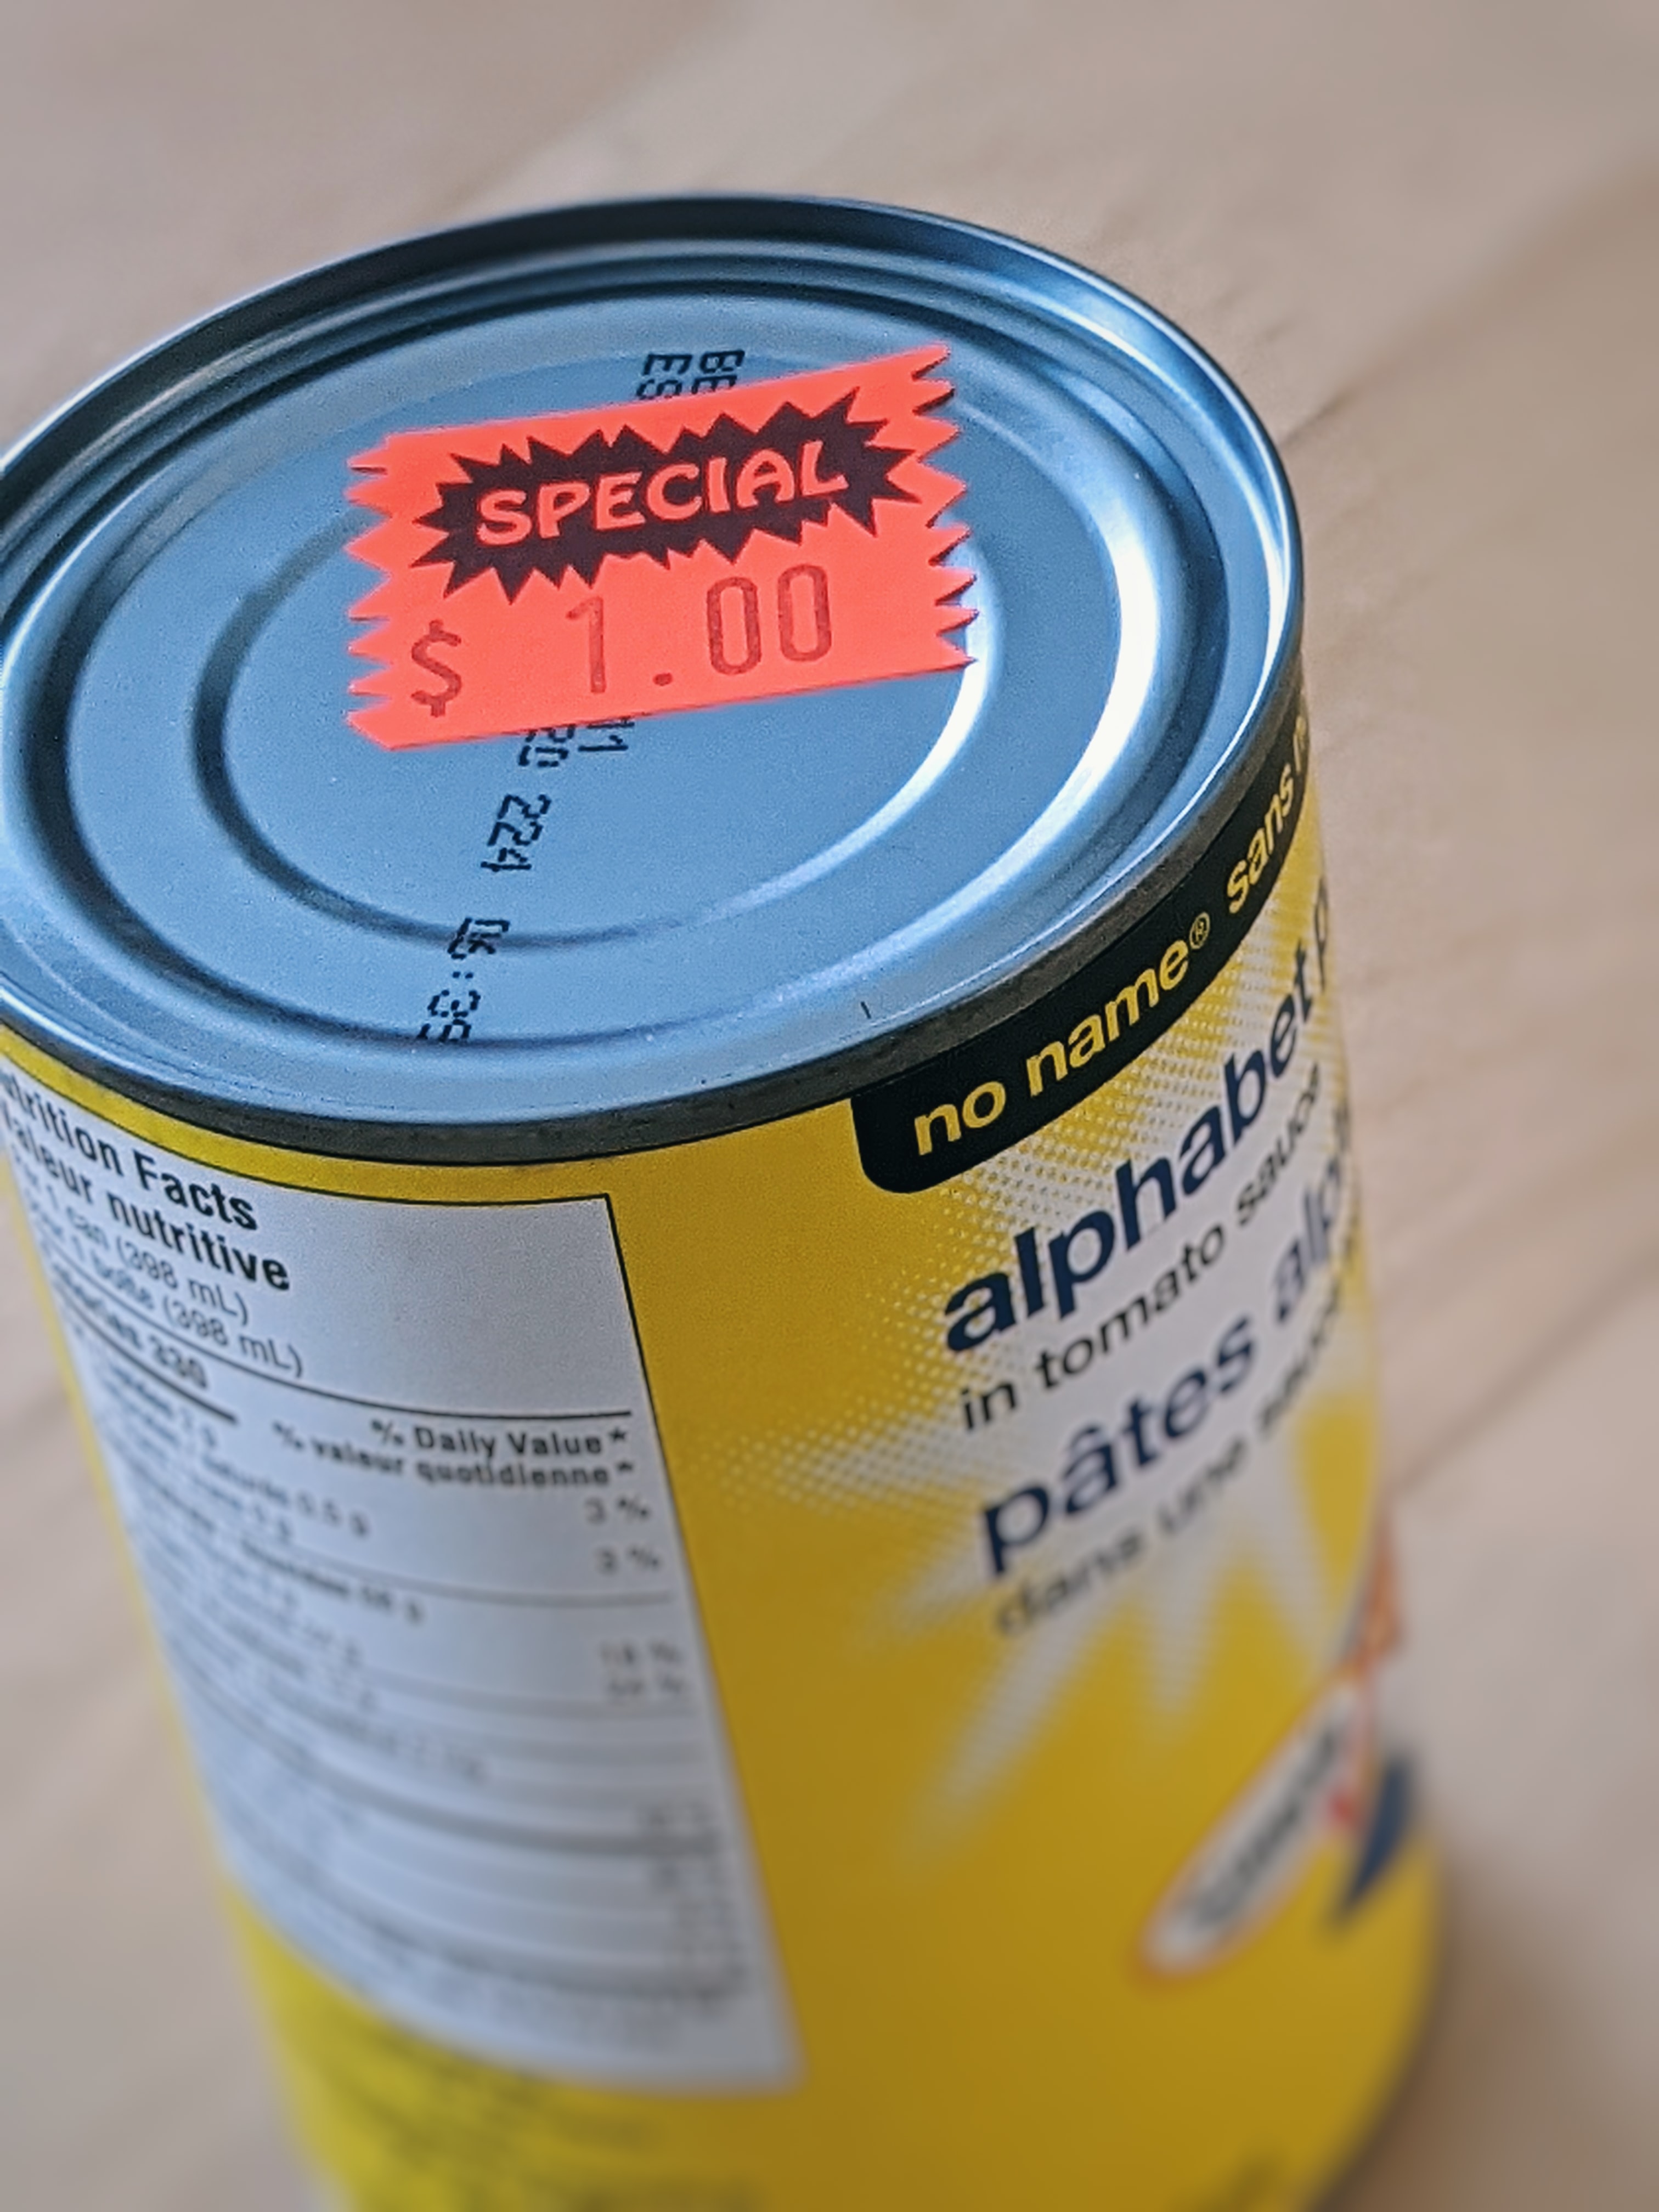 Discounted can of food; image by Sigmund, via Unsplash.com.